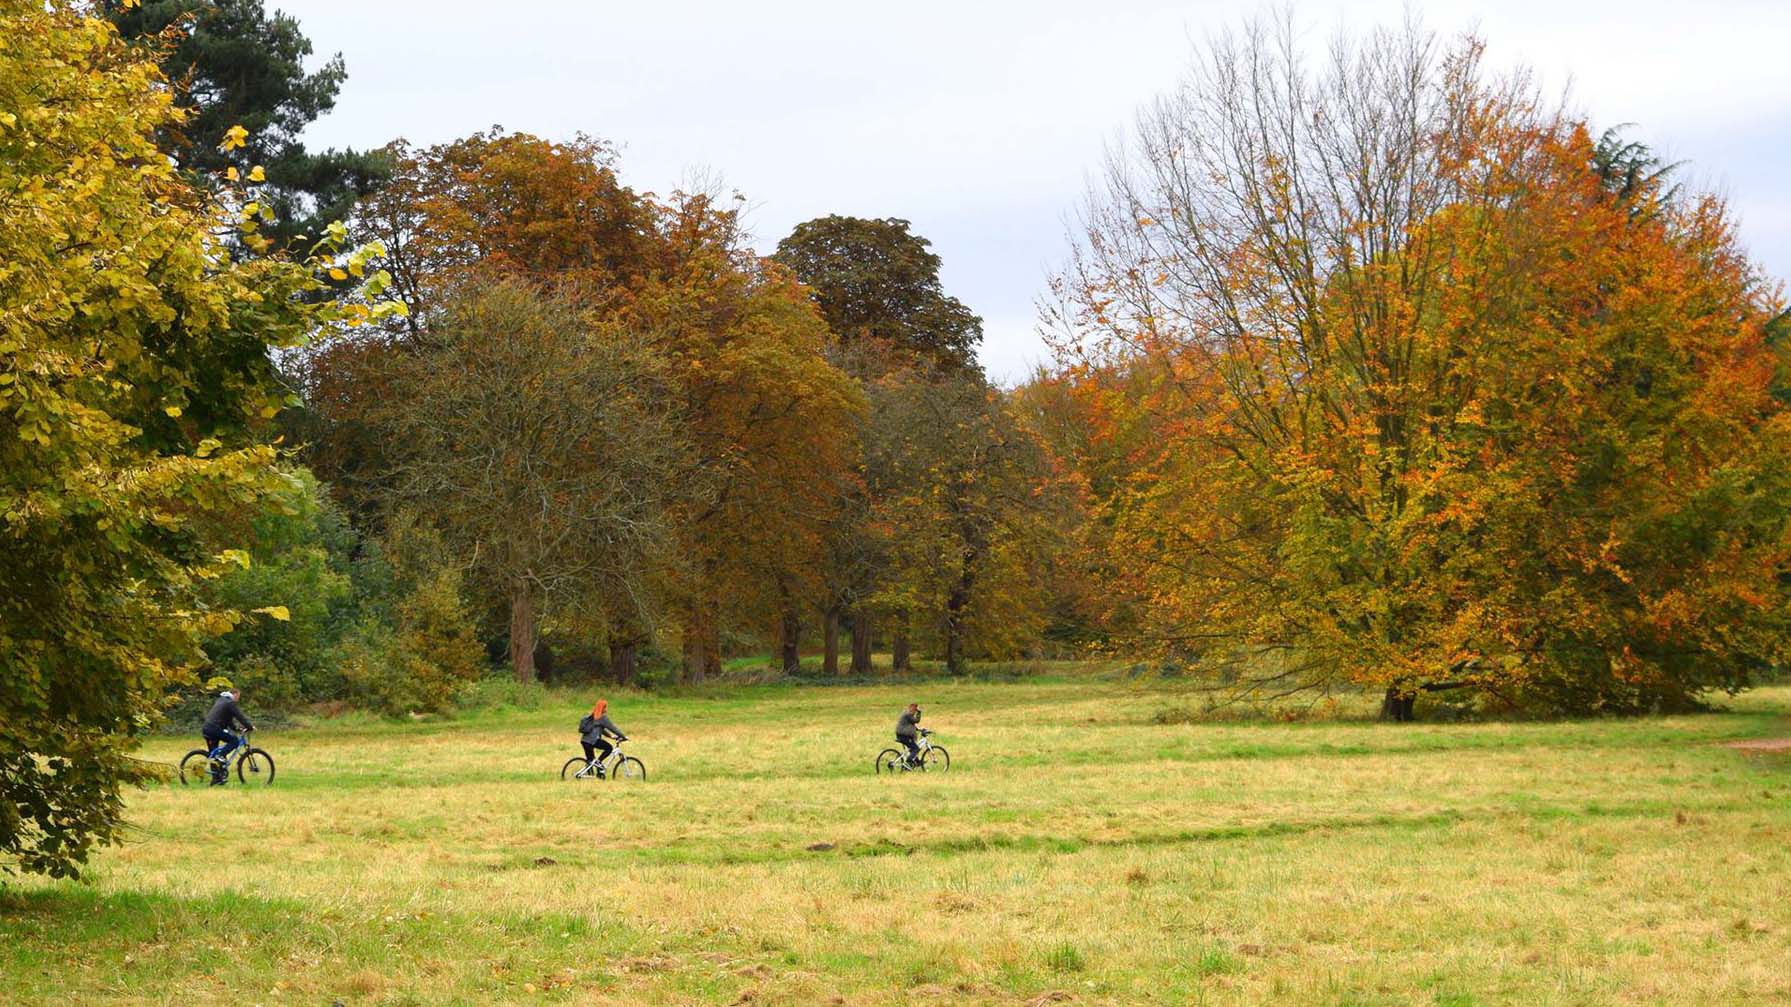 Cassiobury Park is officially one of Britain’s top ten favourite parks